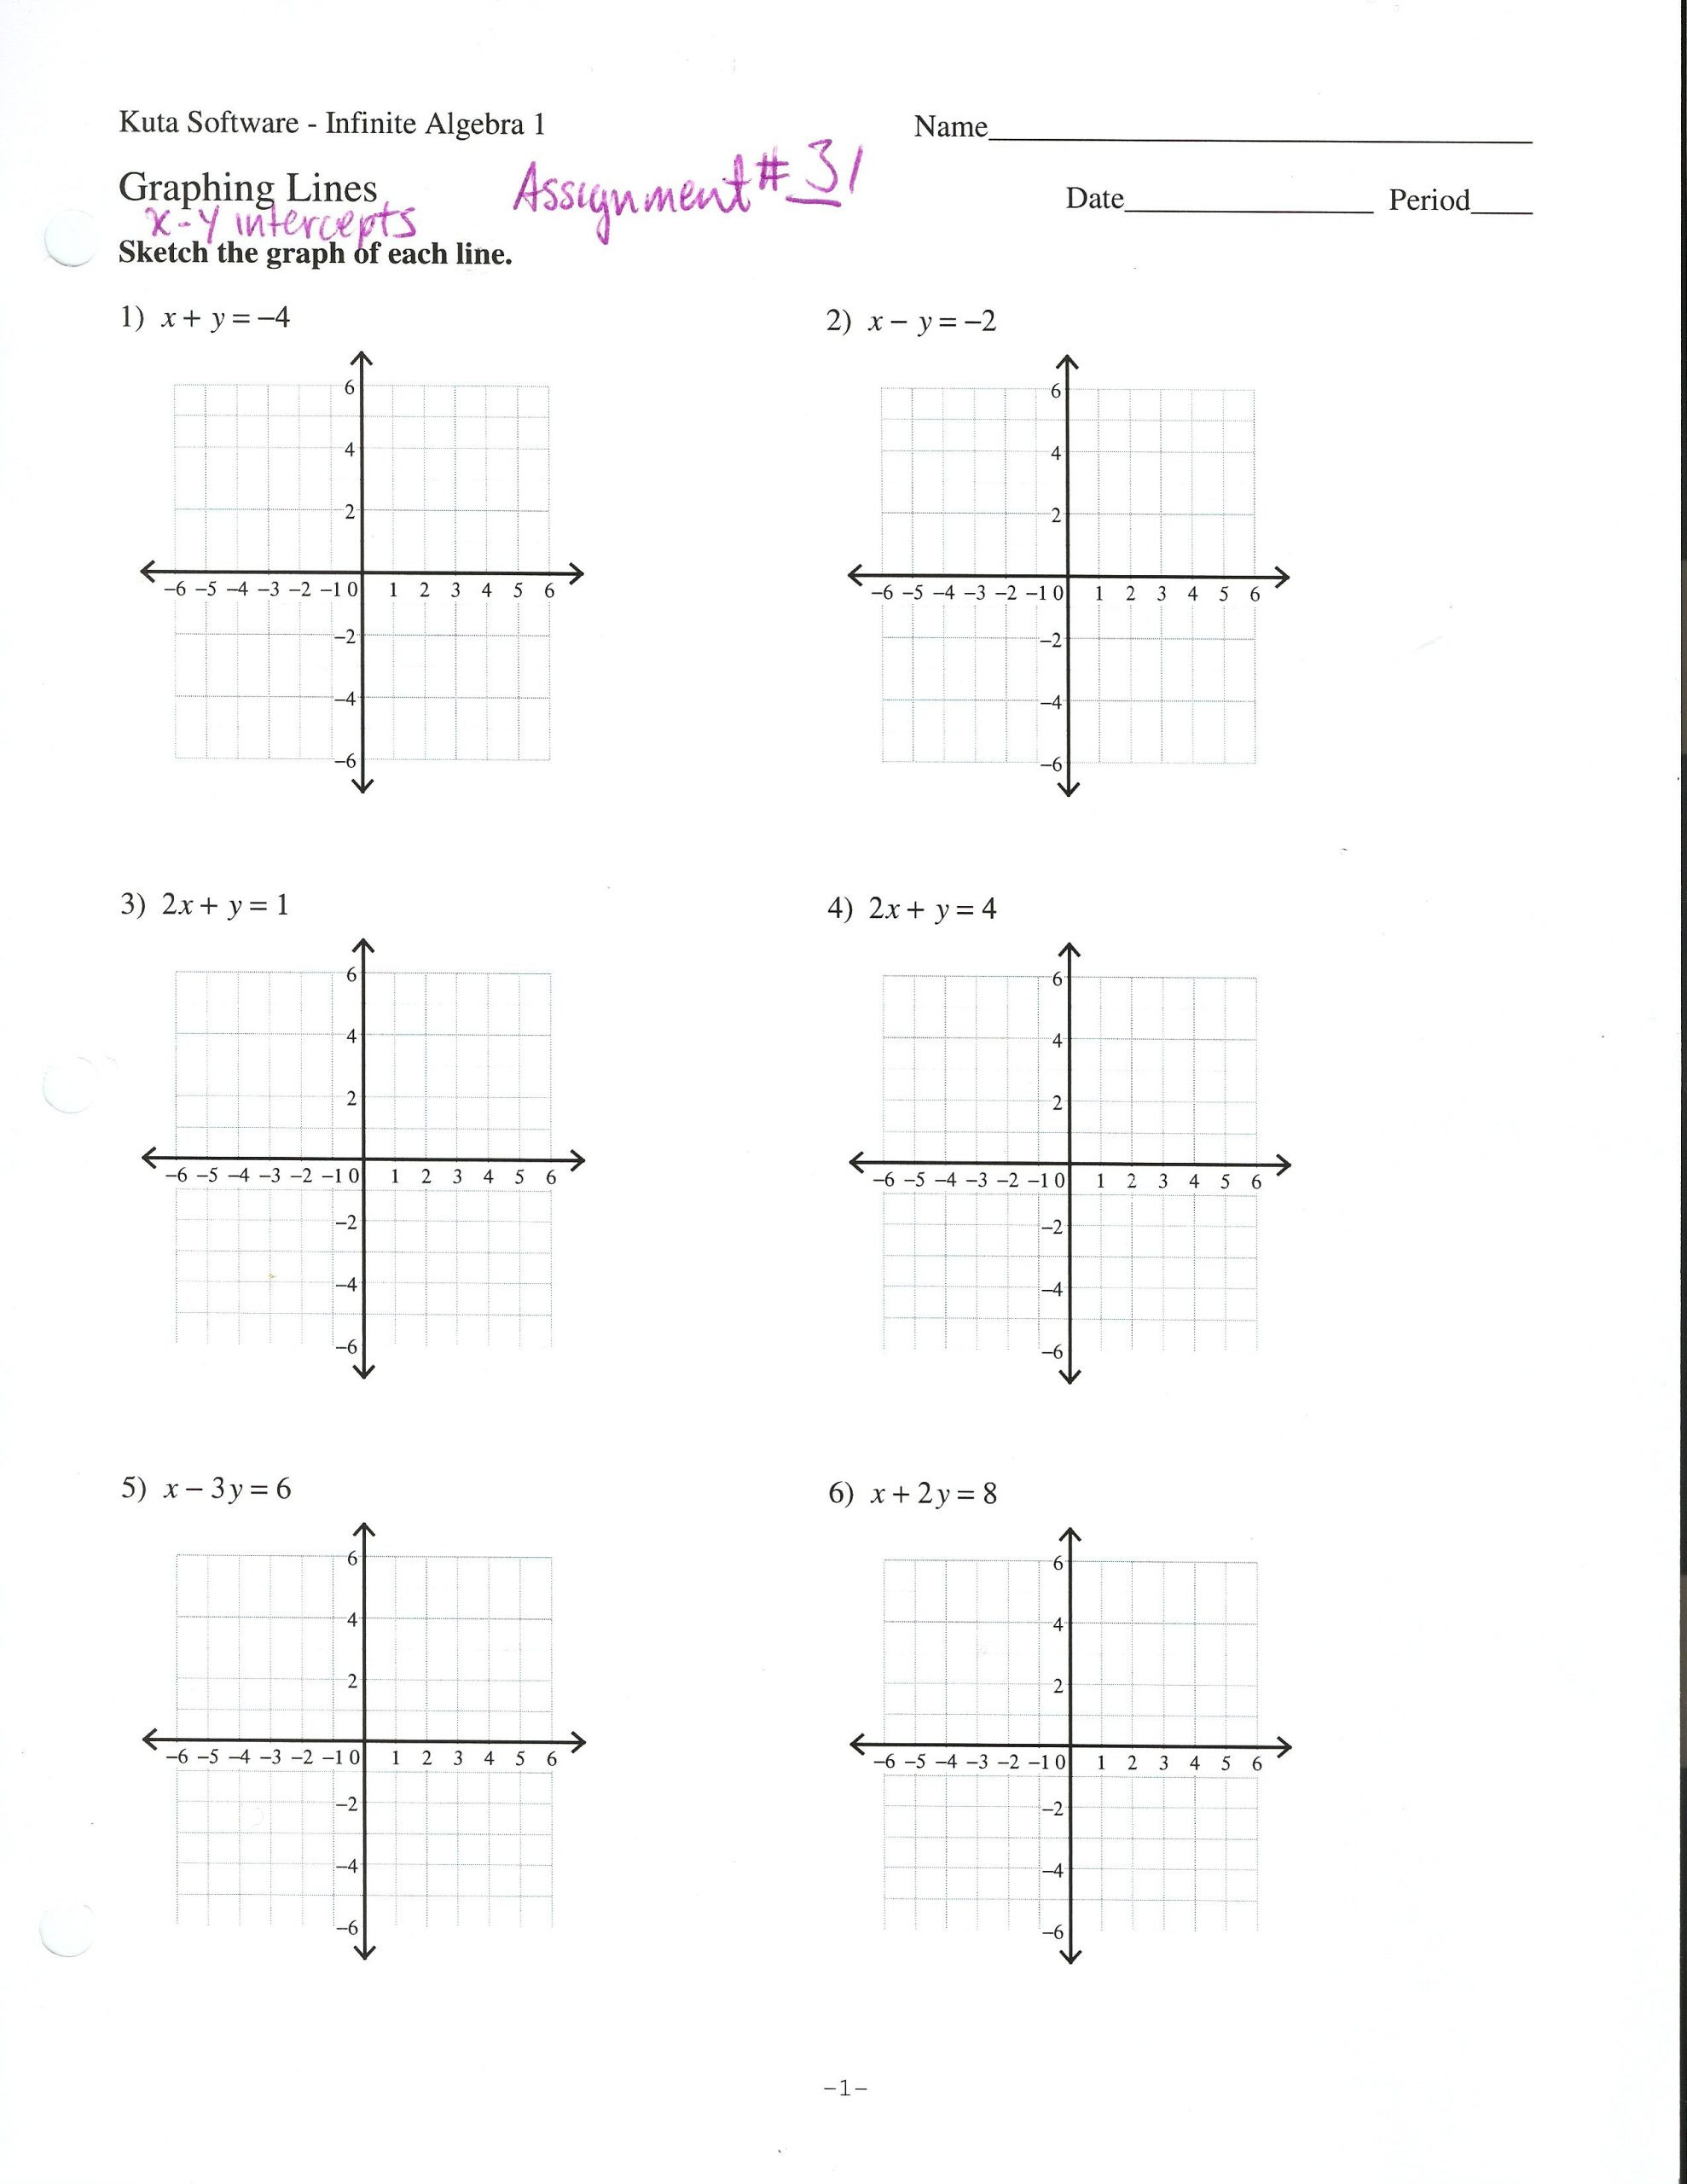 Graphing Linear Equations Worksheet Pdf Worksheets Graphing Linear Equations Worksheet Splendi Pdf